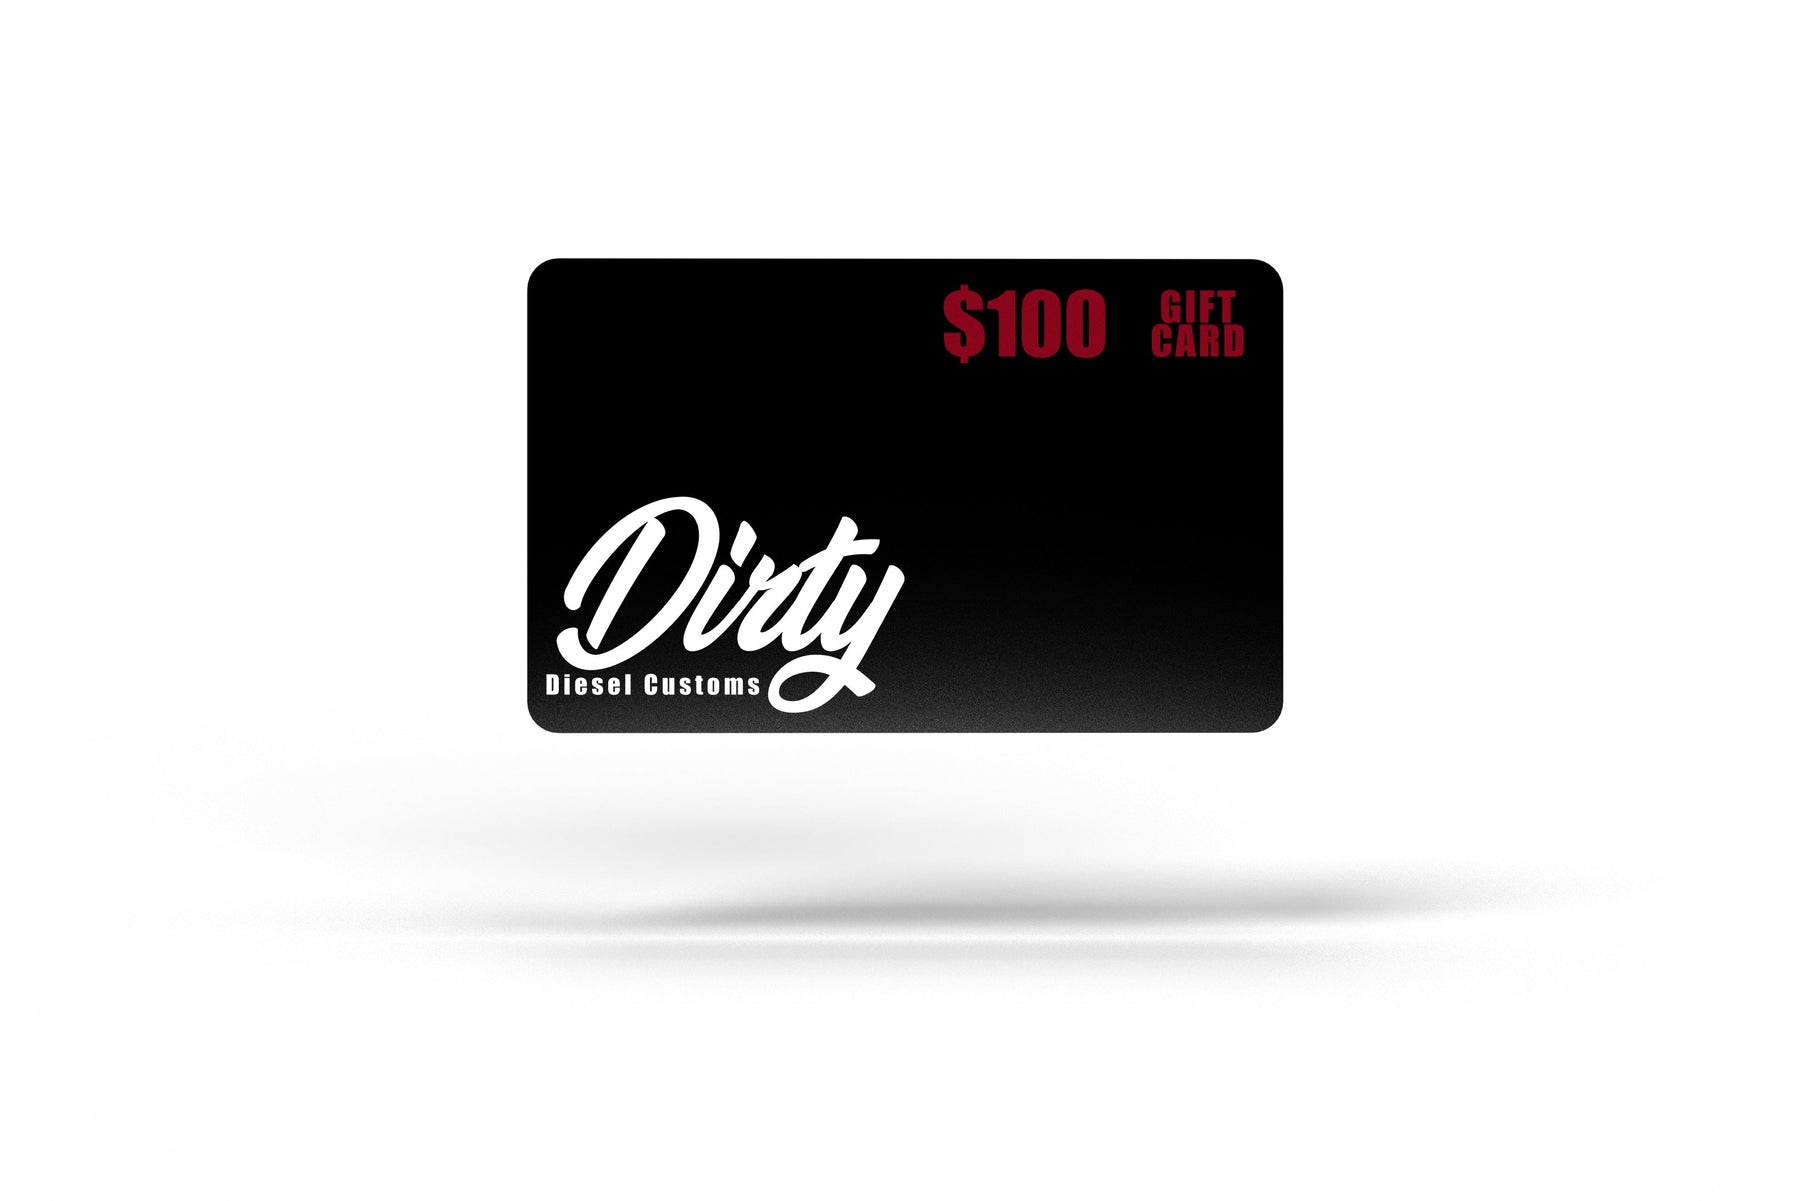 Dirty Diesel Customs Gift Card-Gift Cards-Dirty Diesel Customs-DDC-GC-100-Dirty Diesel Customs